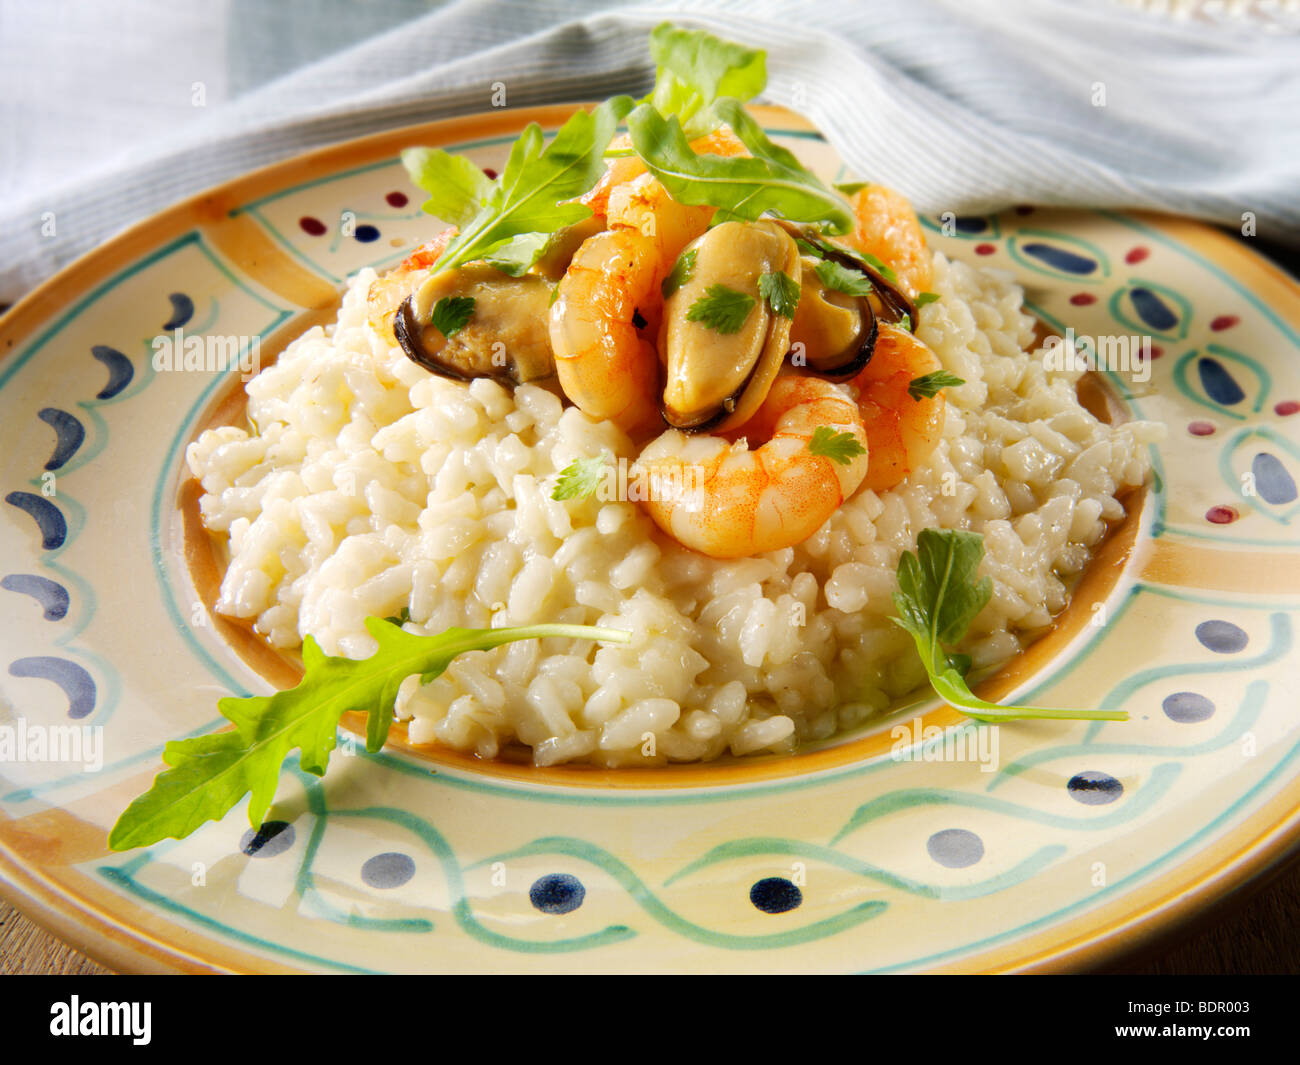 Fresh cooked prawns and mussels risotto, served plated on a table setting. Serving suggestion Stock Photo